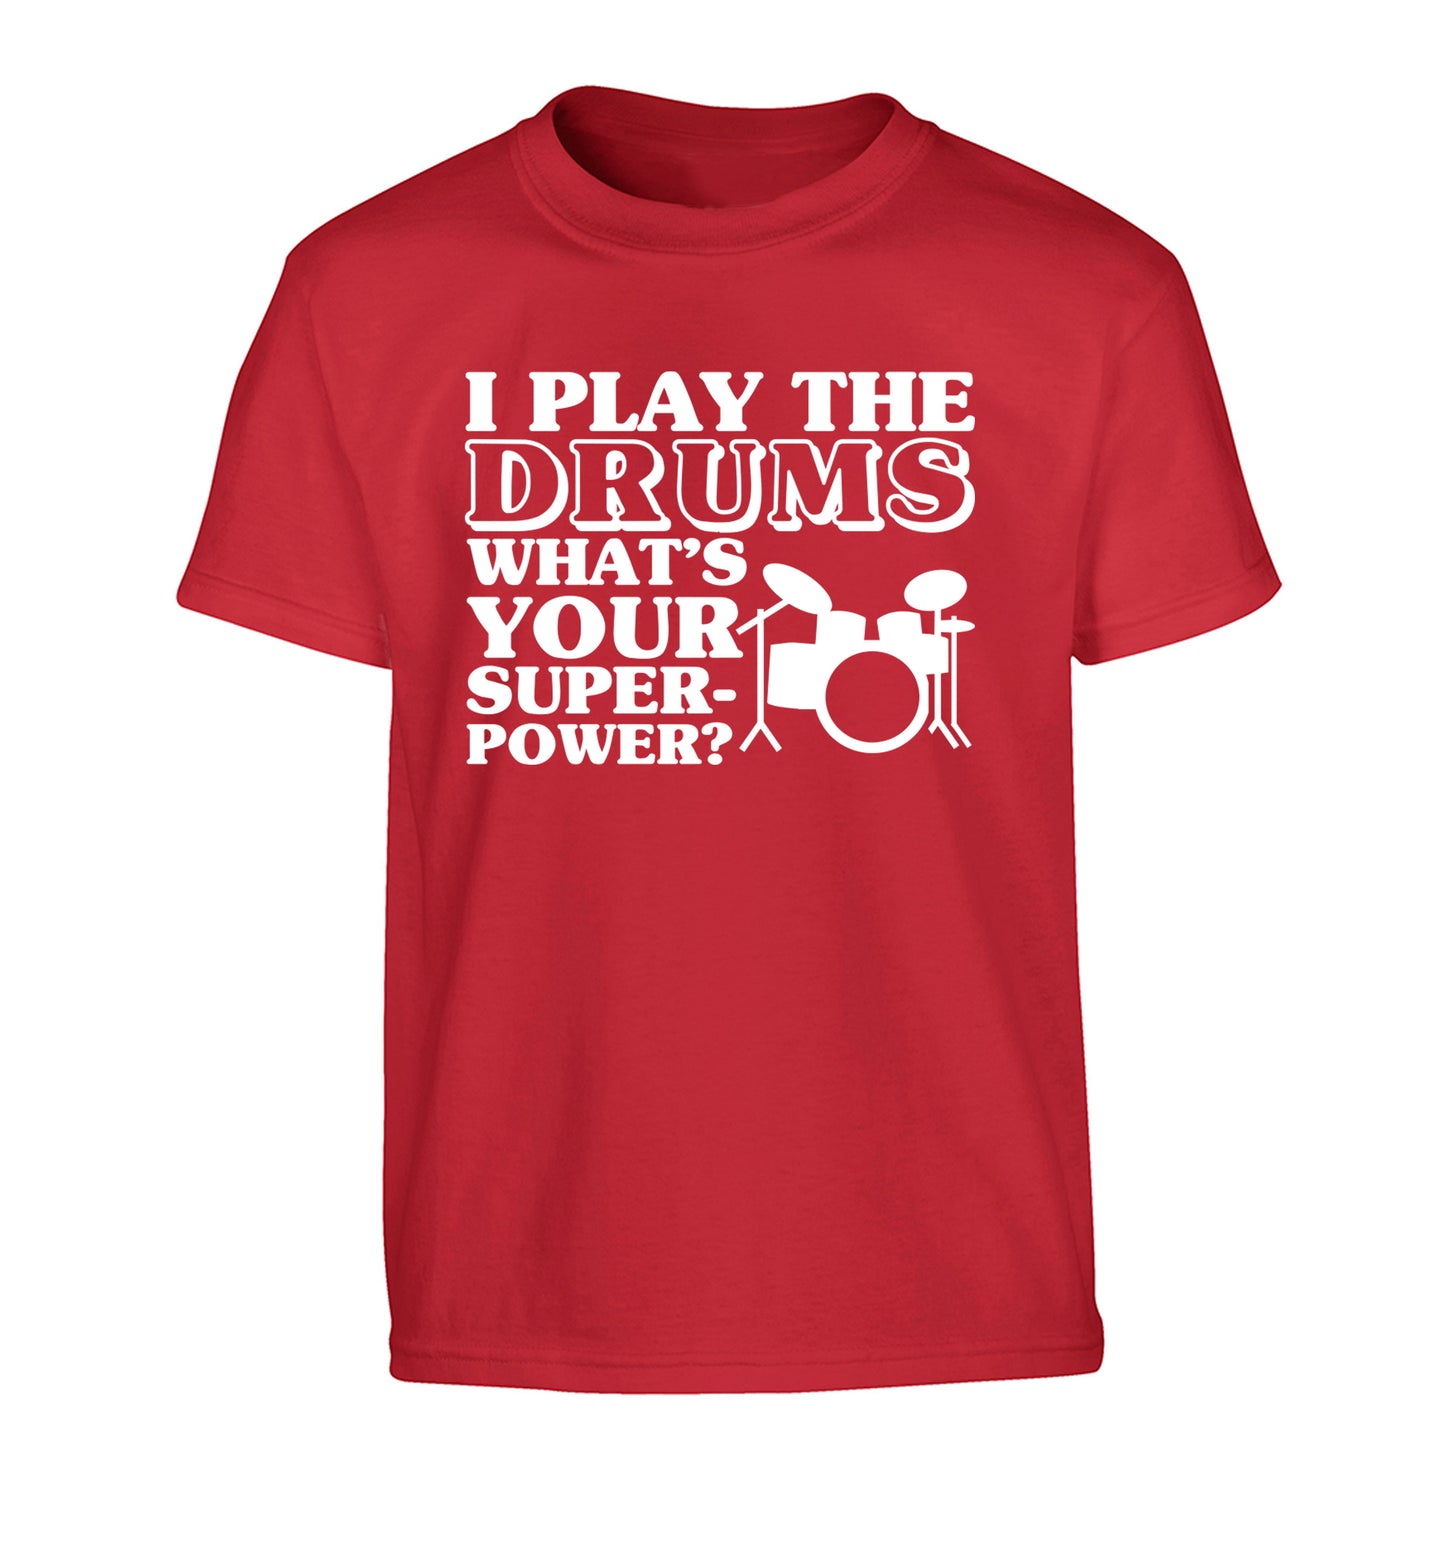 I play the drums what's your superpower? Children's red Tshirt 12-14 Years